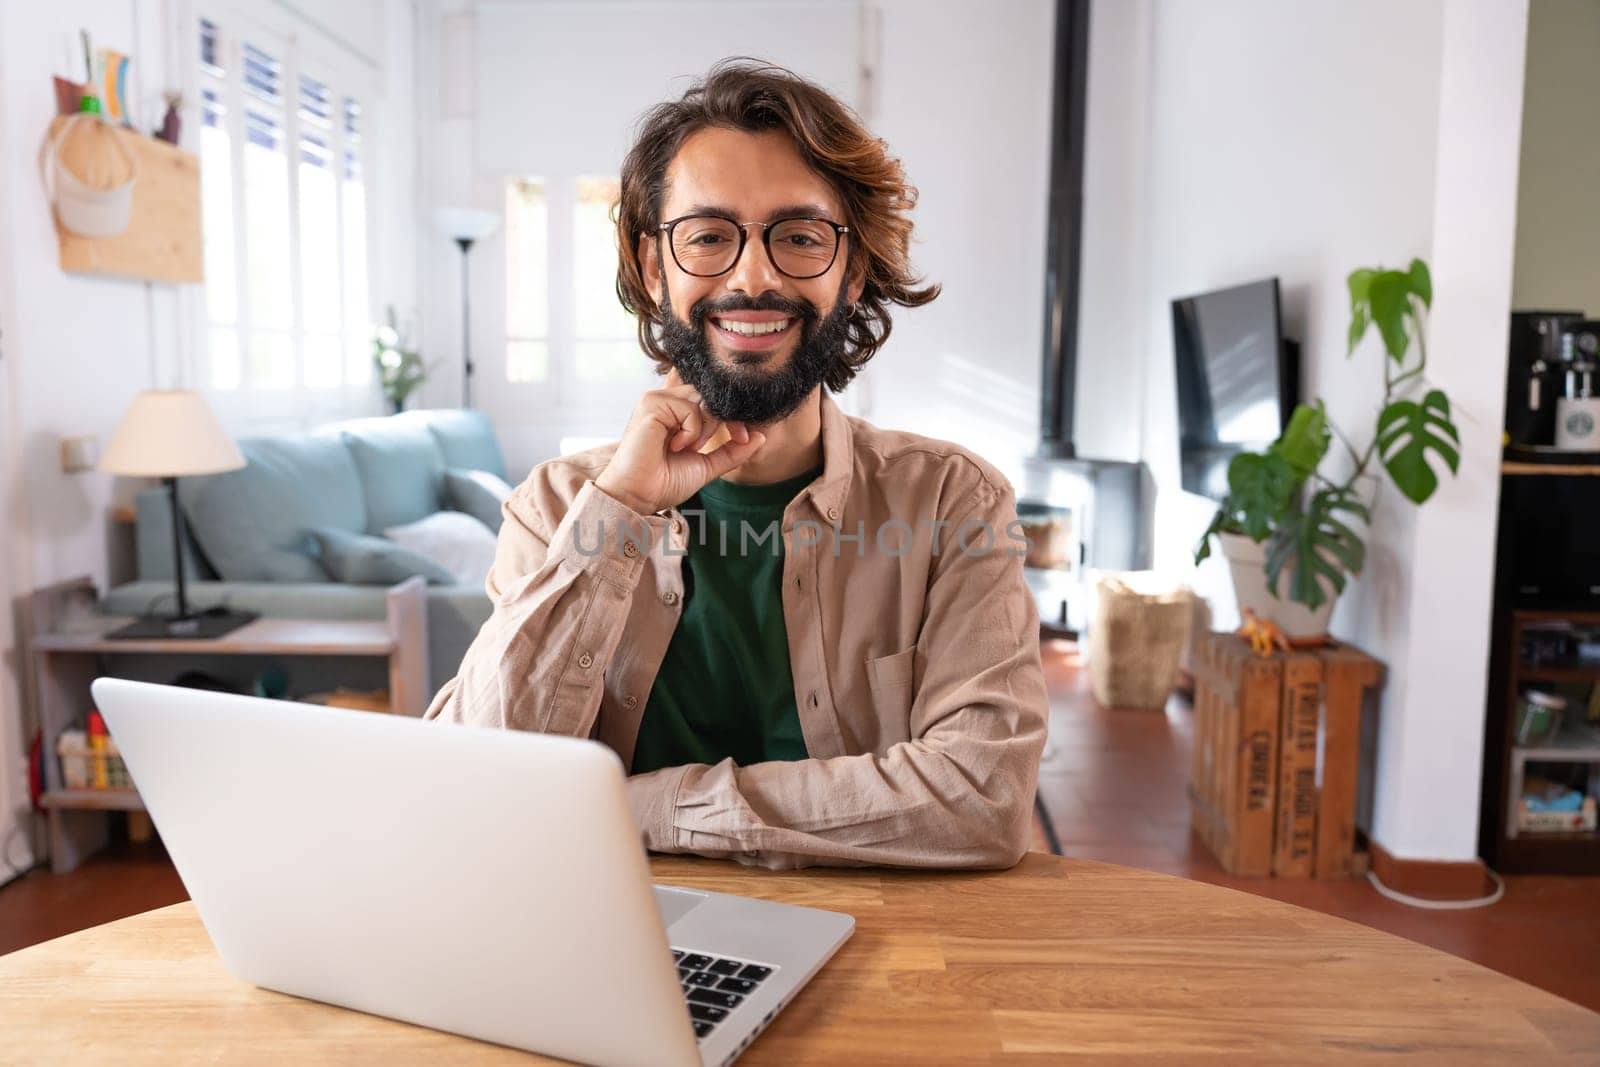 Cheerful smiling male looking at camera using laptop at home remote work in a small business. Portrait of a freelancer entrepreneur working in a creative project. High quality photo